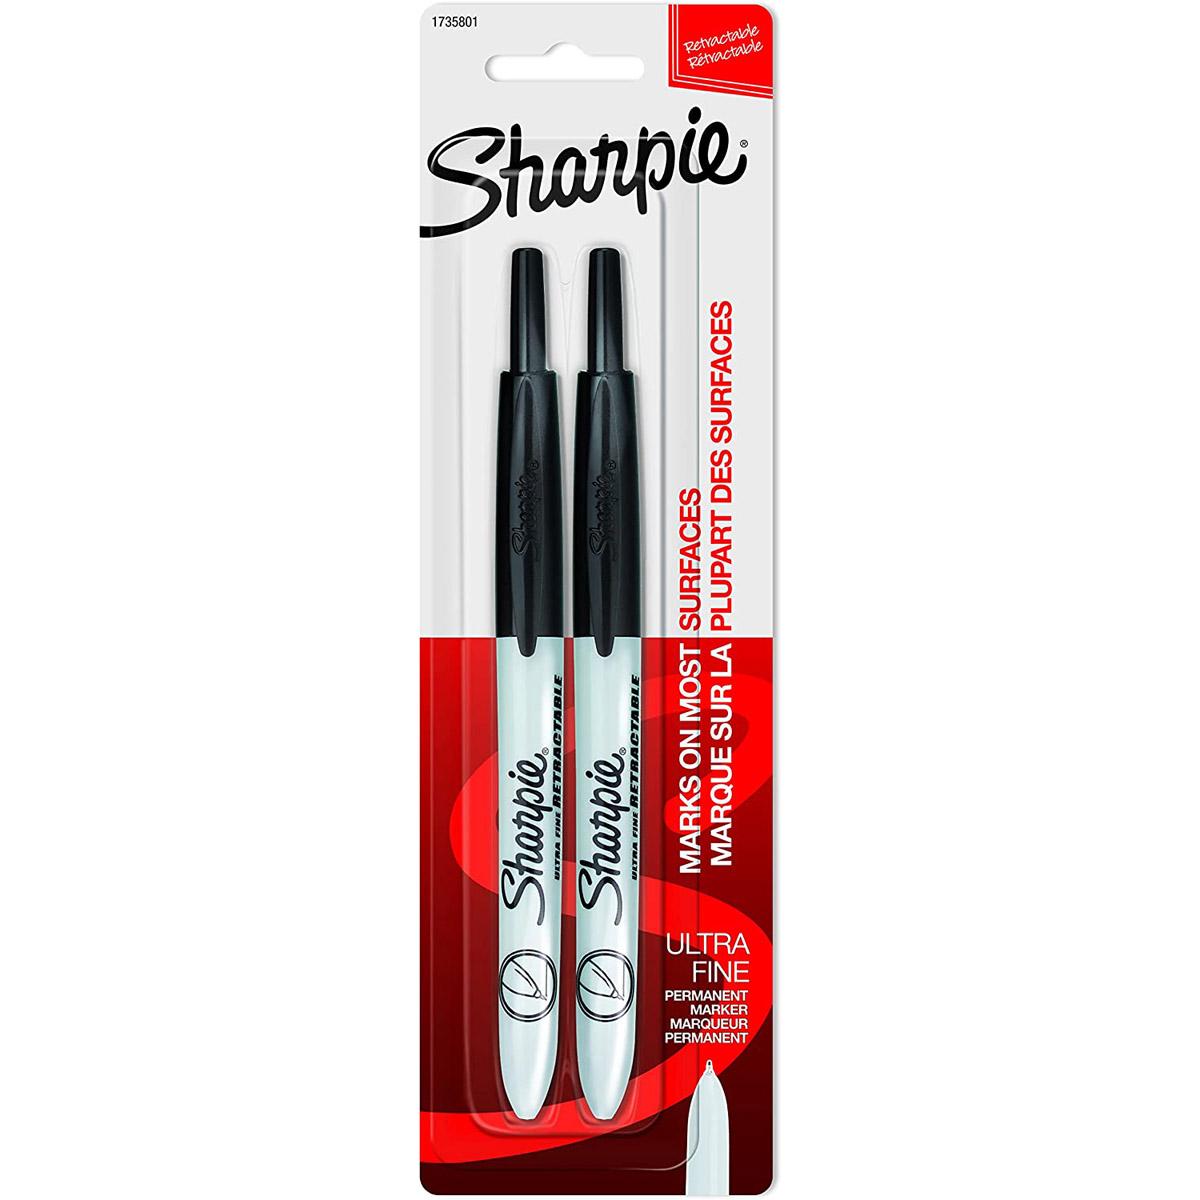 Sharpie Retractable Permanent Markers 2 Sets  for $2.97 Shipped